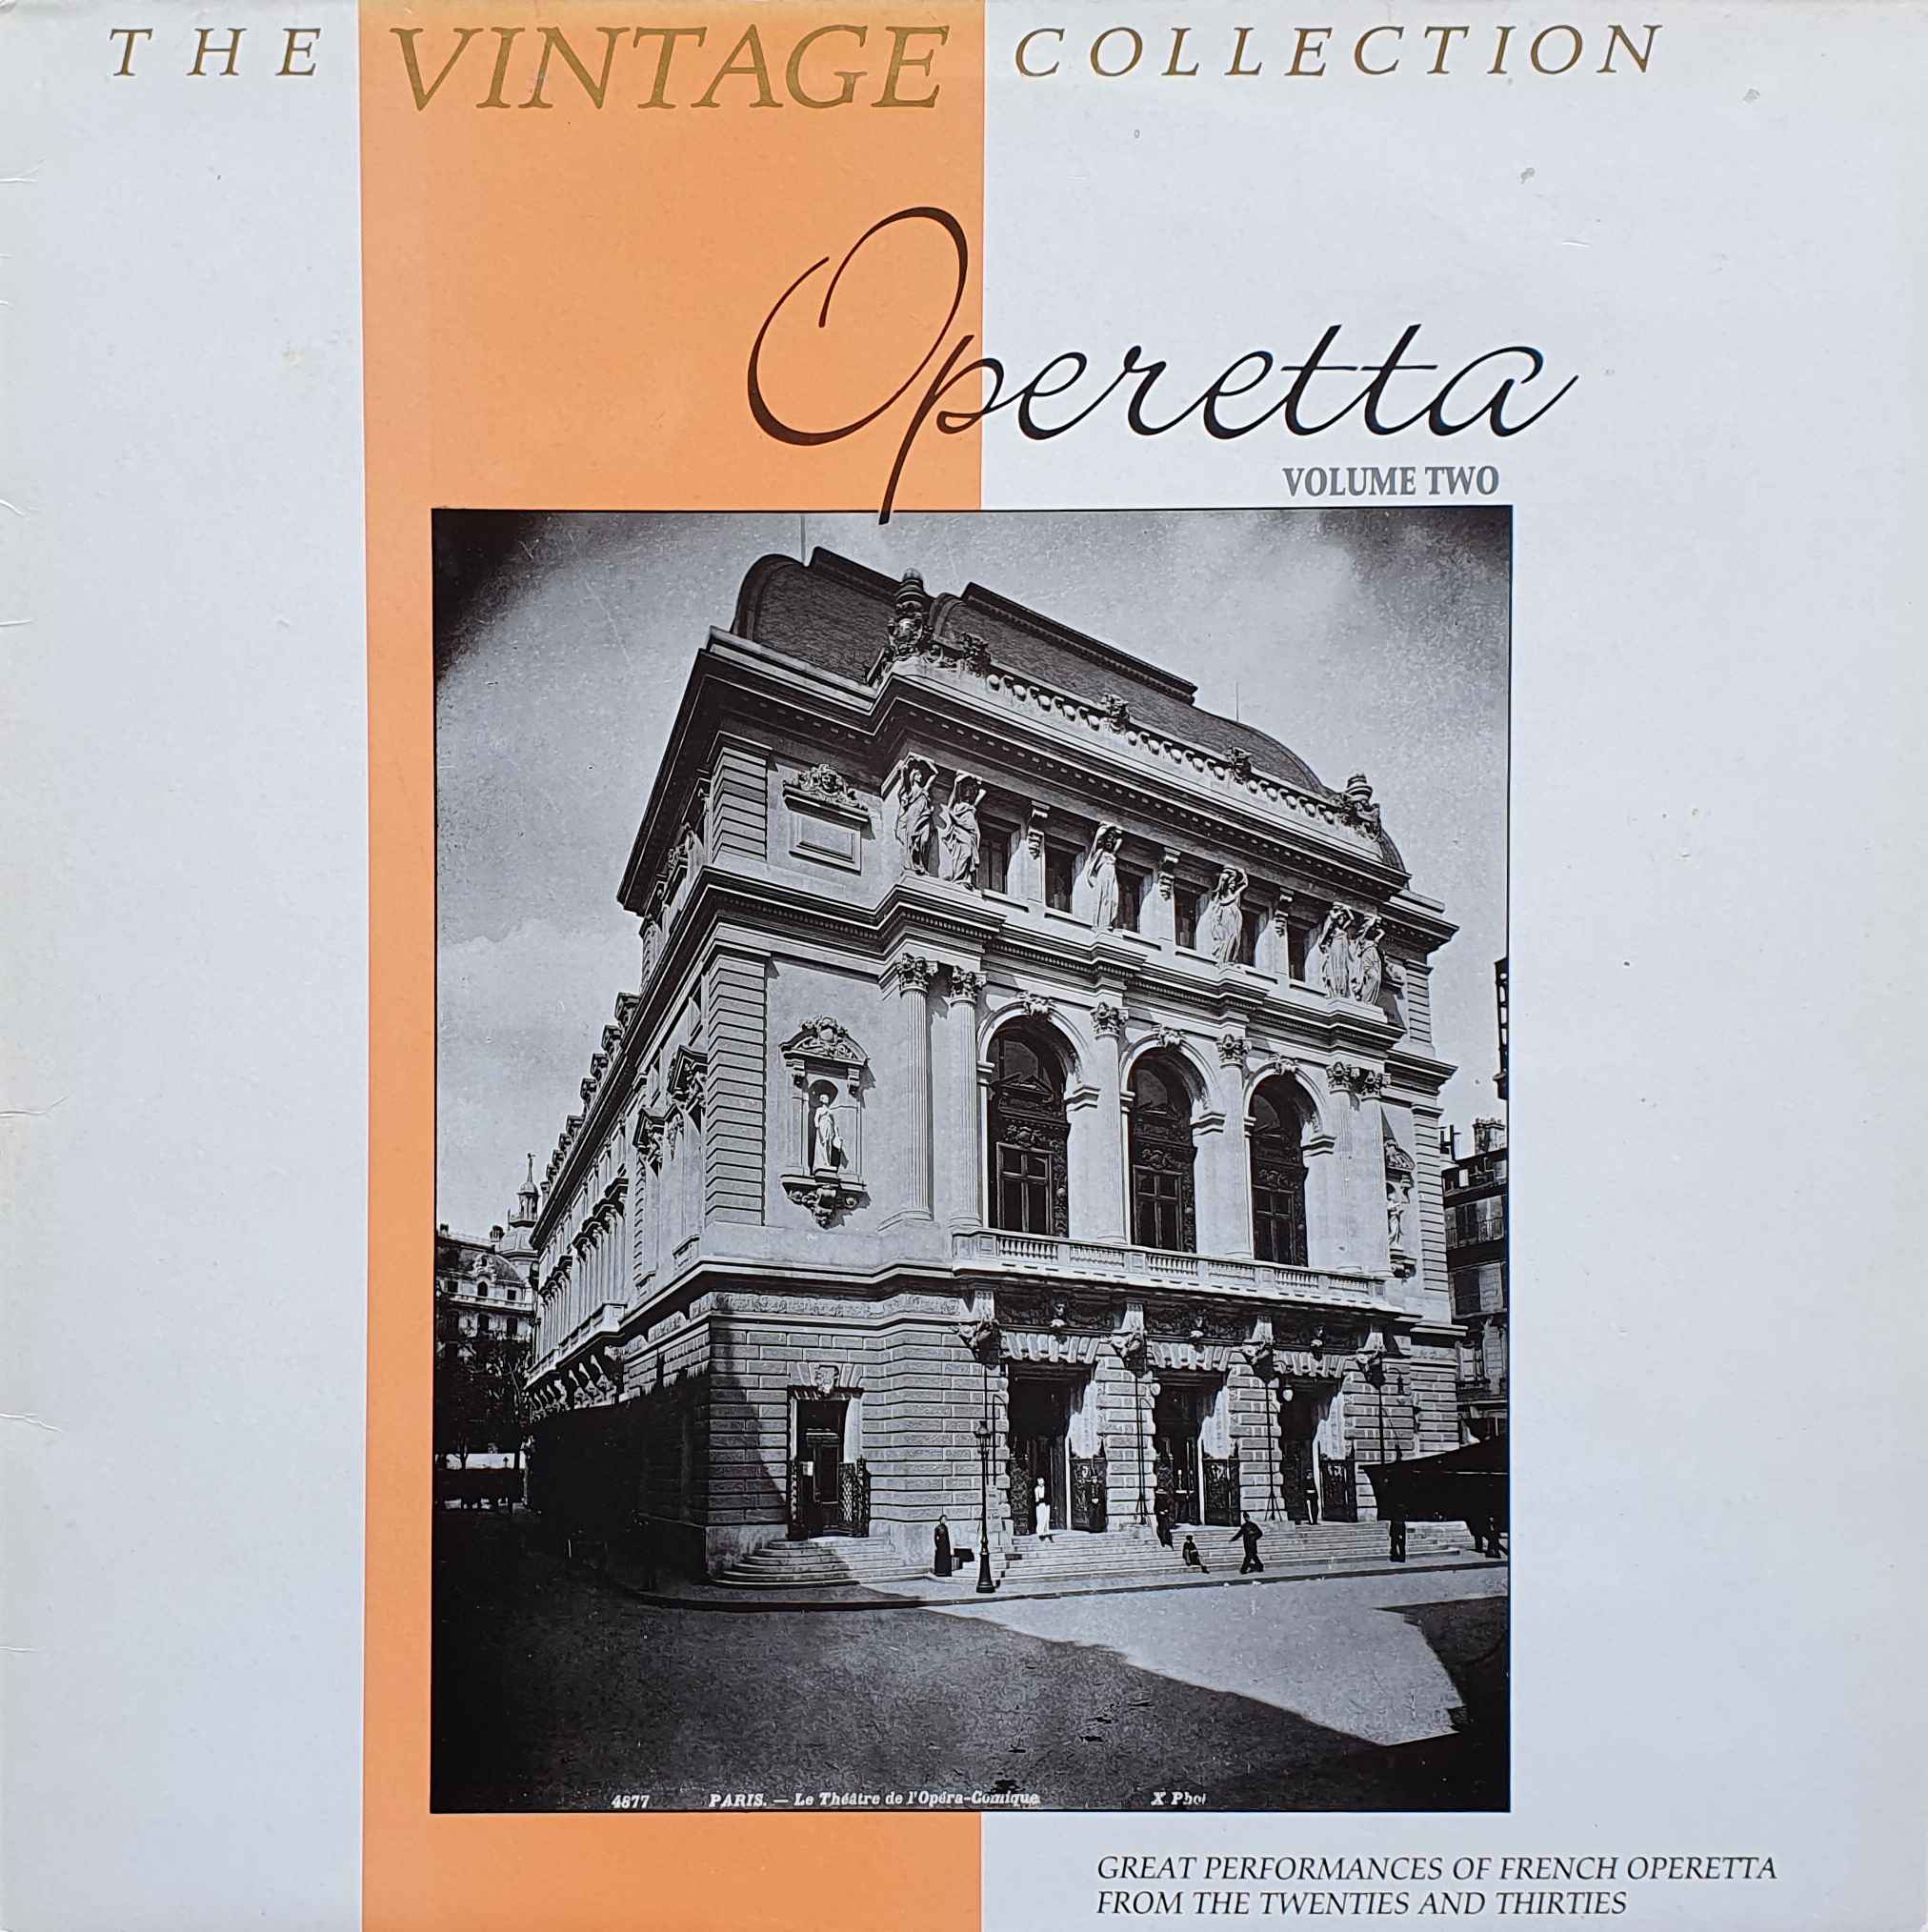 Picture of REH 755 The vintage collection - Operetta volume 2 by artist Various from the BBC records and Tapes library